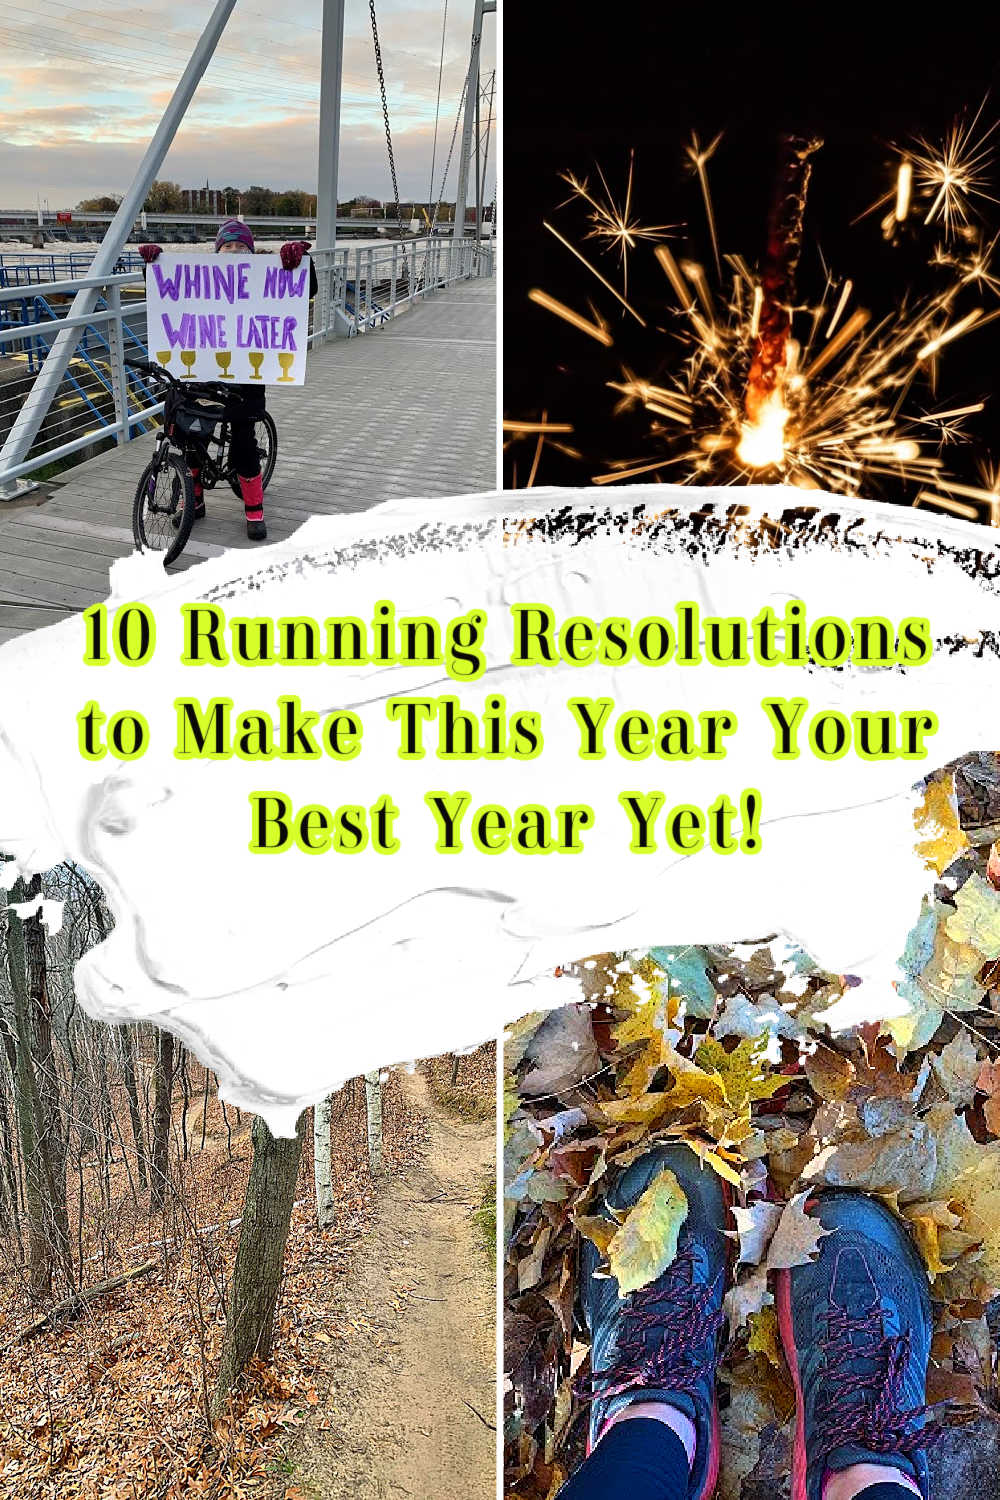 10 Running Resolutions to Make This Year Your Best Year Yet!